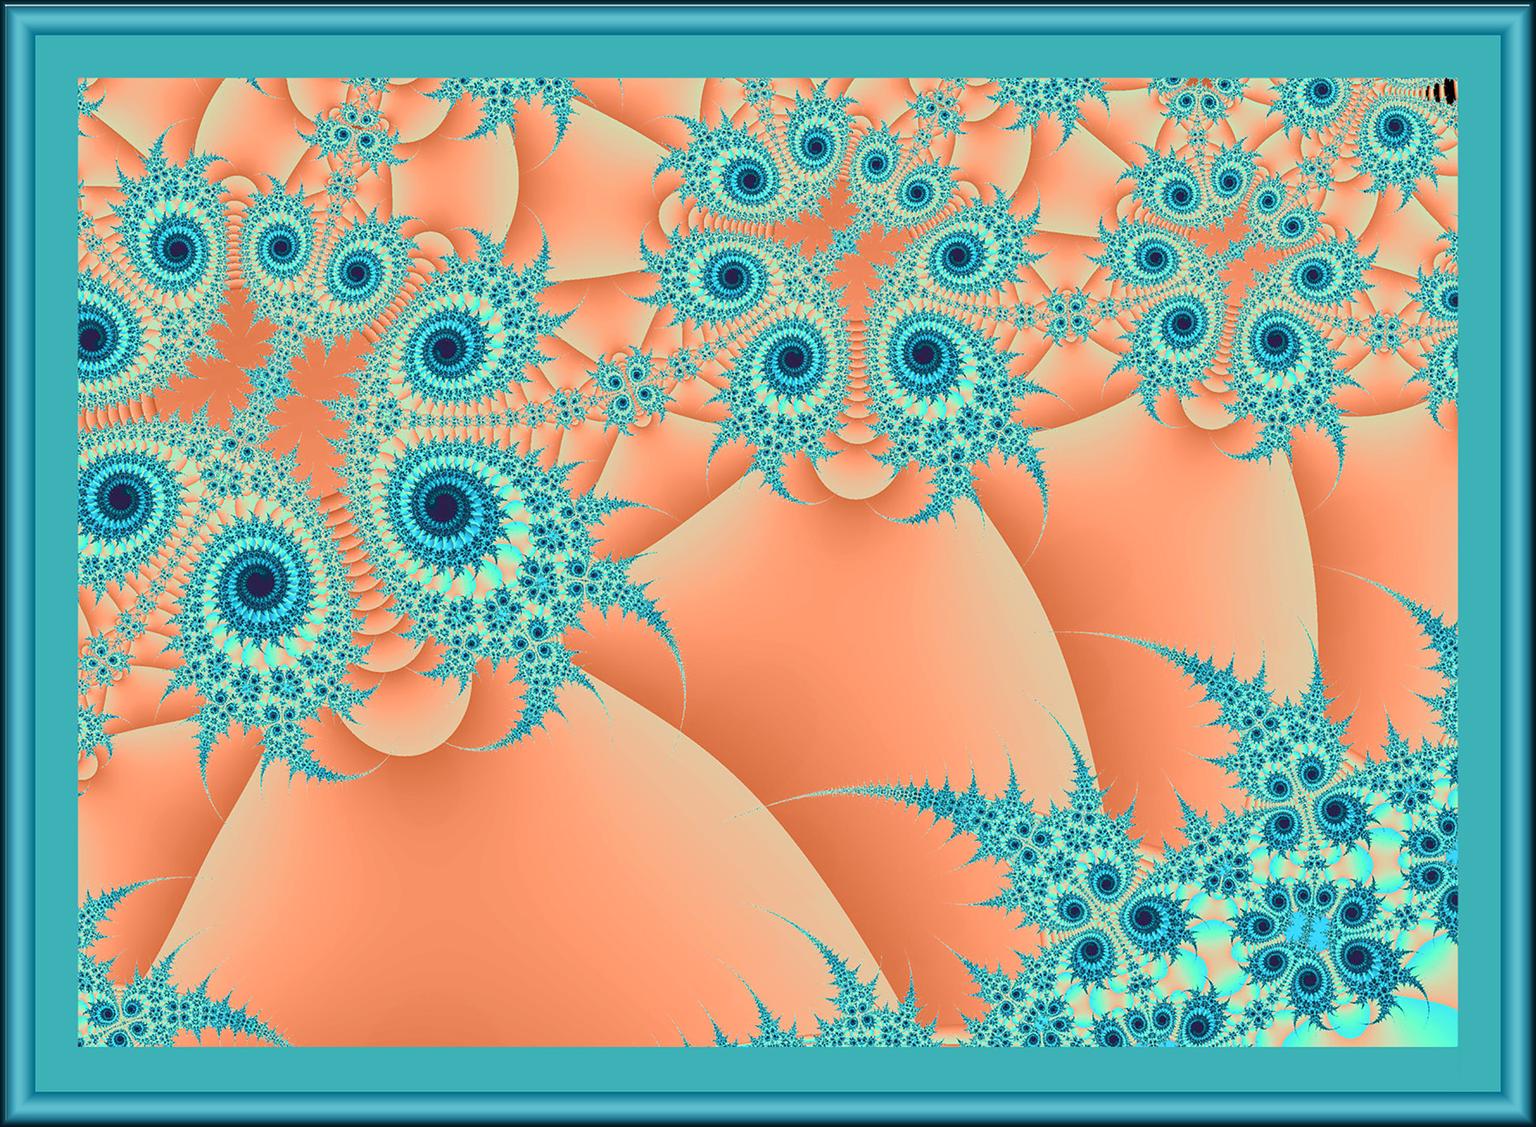 Image for entry 'Happy Fractal Creatures'